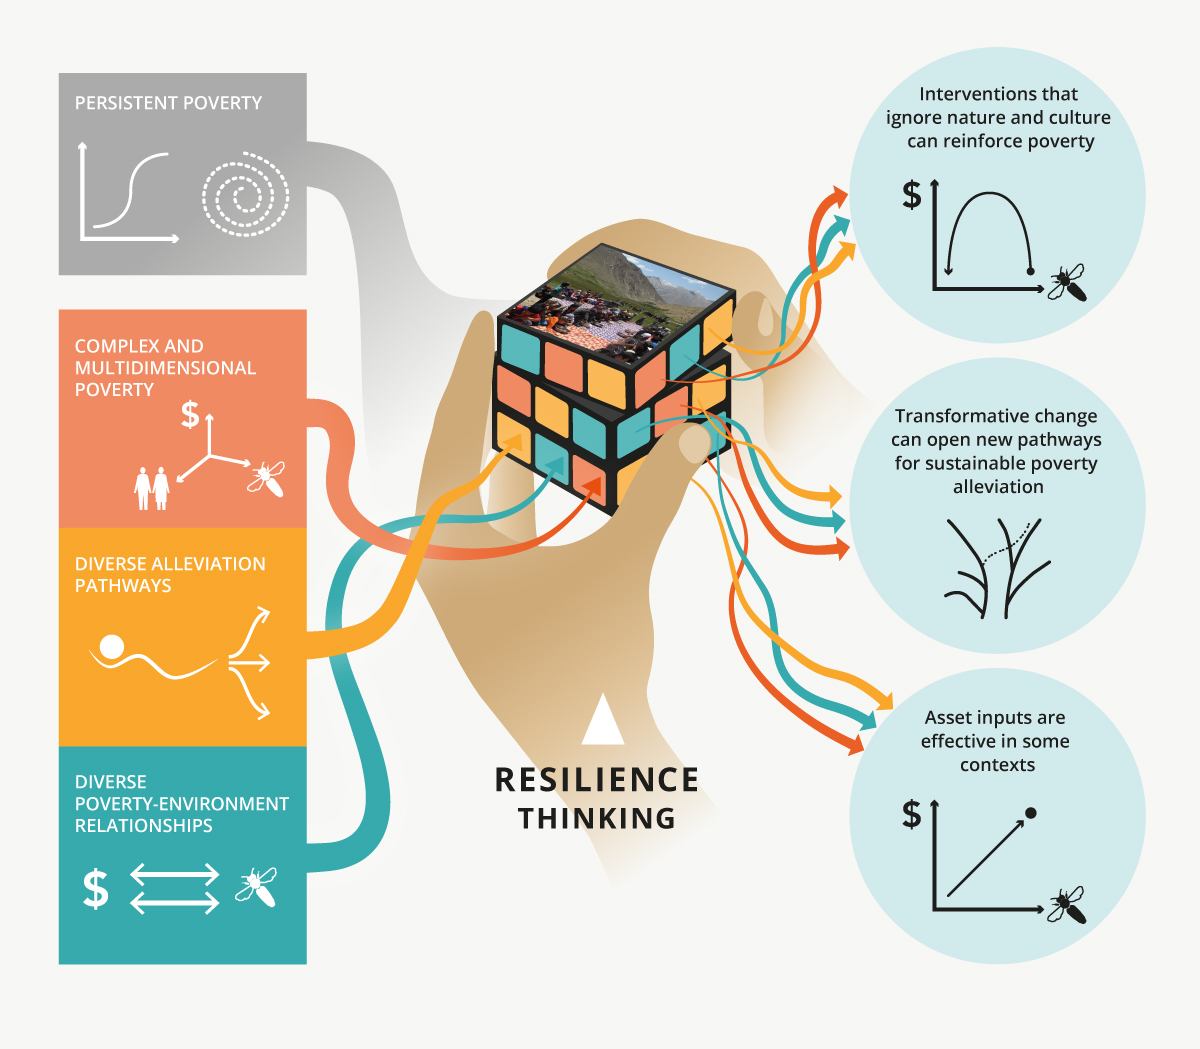 The poverty-environment puzzle: Complex interactions between poverty, possible pathways to alleviate it, and the conditions where it exists can be fed into the poverty trap concept and looked at through a resilience thinking lens. Multidimensional poverty trap models based on these inputs can provide qualitative results that hint at effective poverty alleviation pathways. Illustration: E. Wikander/Azote. Photo on cube: Jamila Haider.